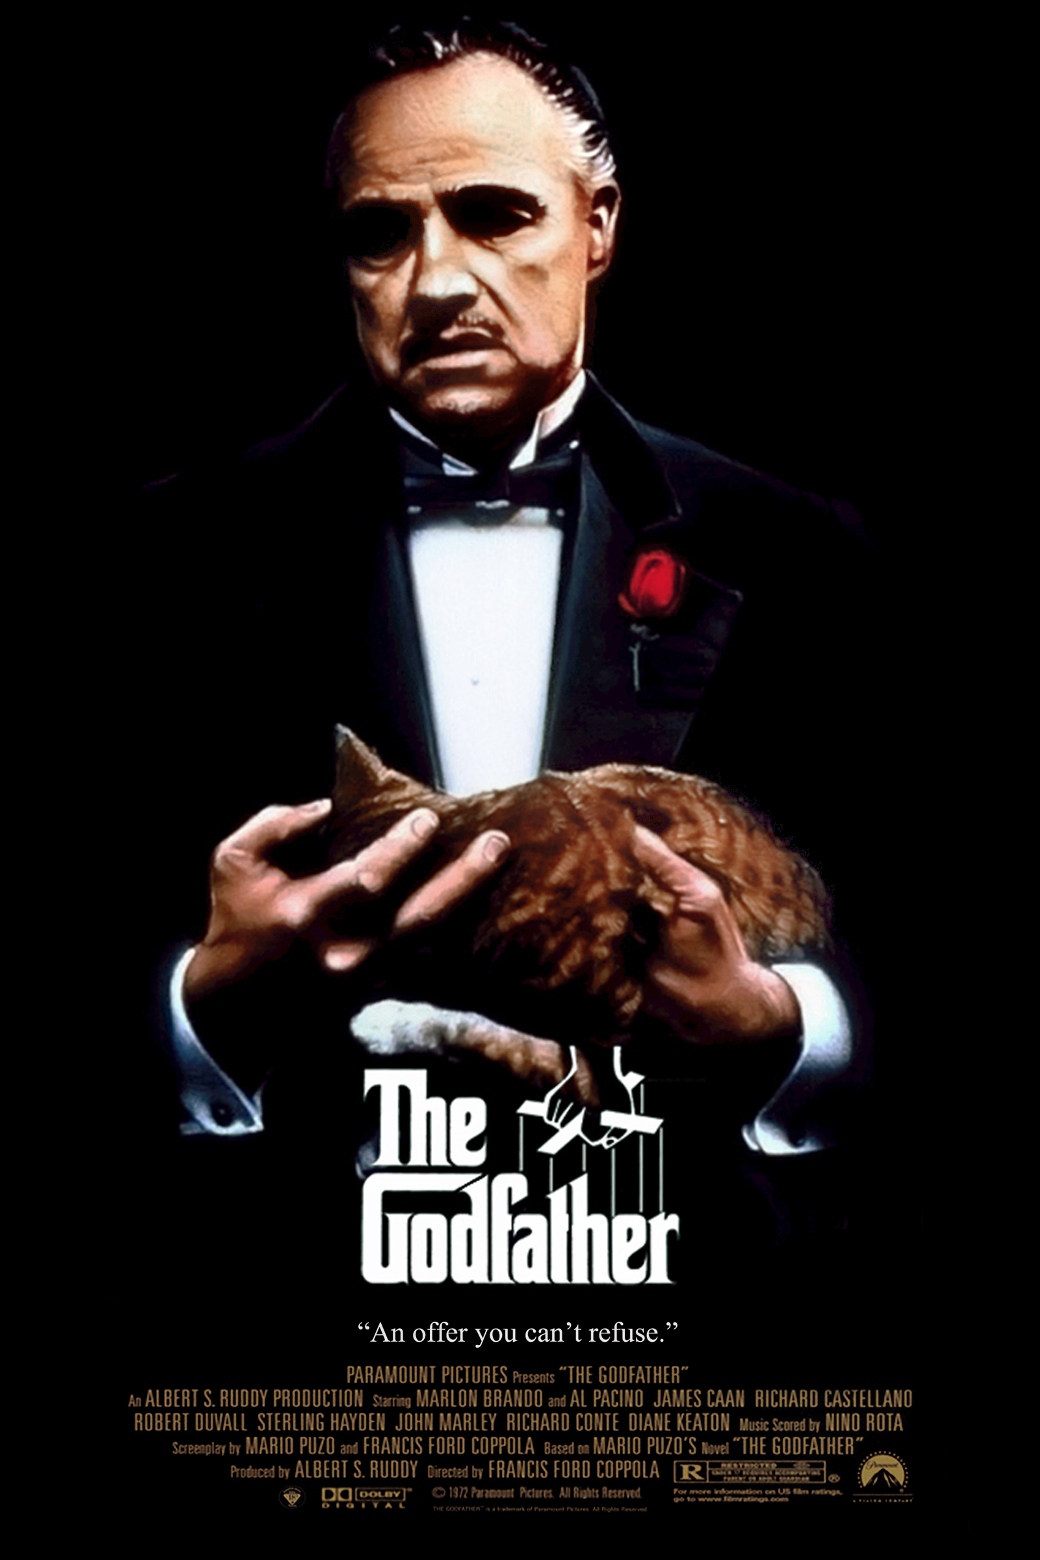 The Godfather (1972) | Reel Affinity - 12 Great Movies Every Hustler Entrepreneur Must Watch
